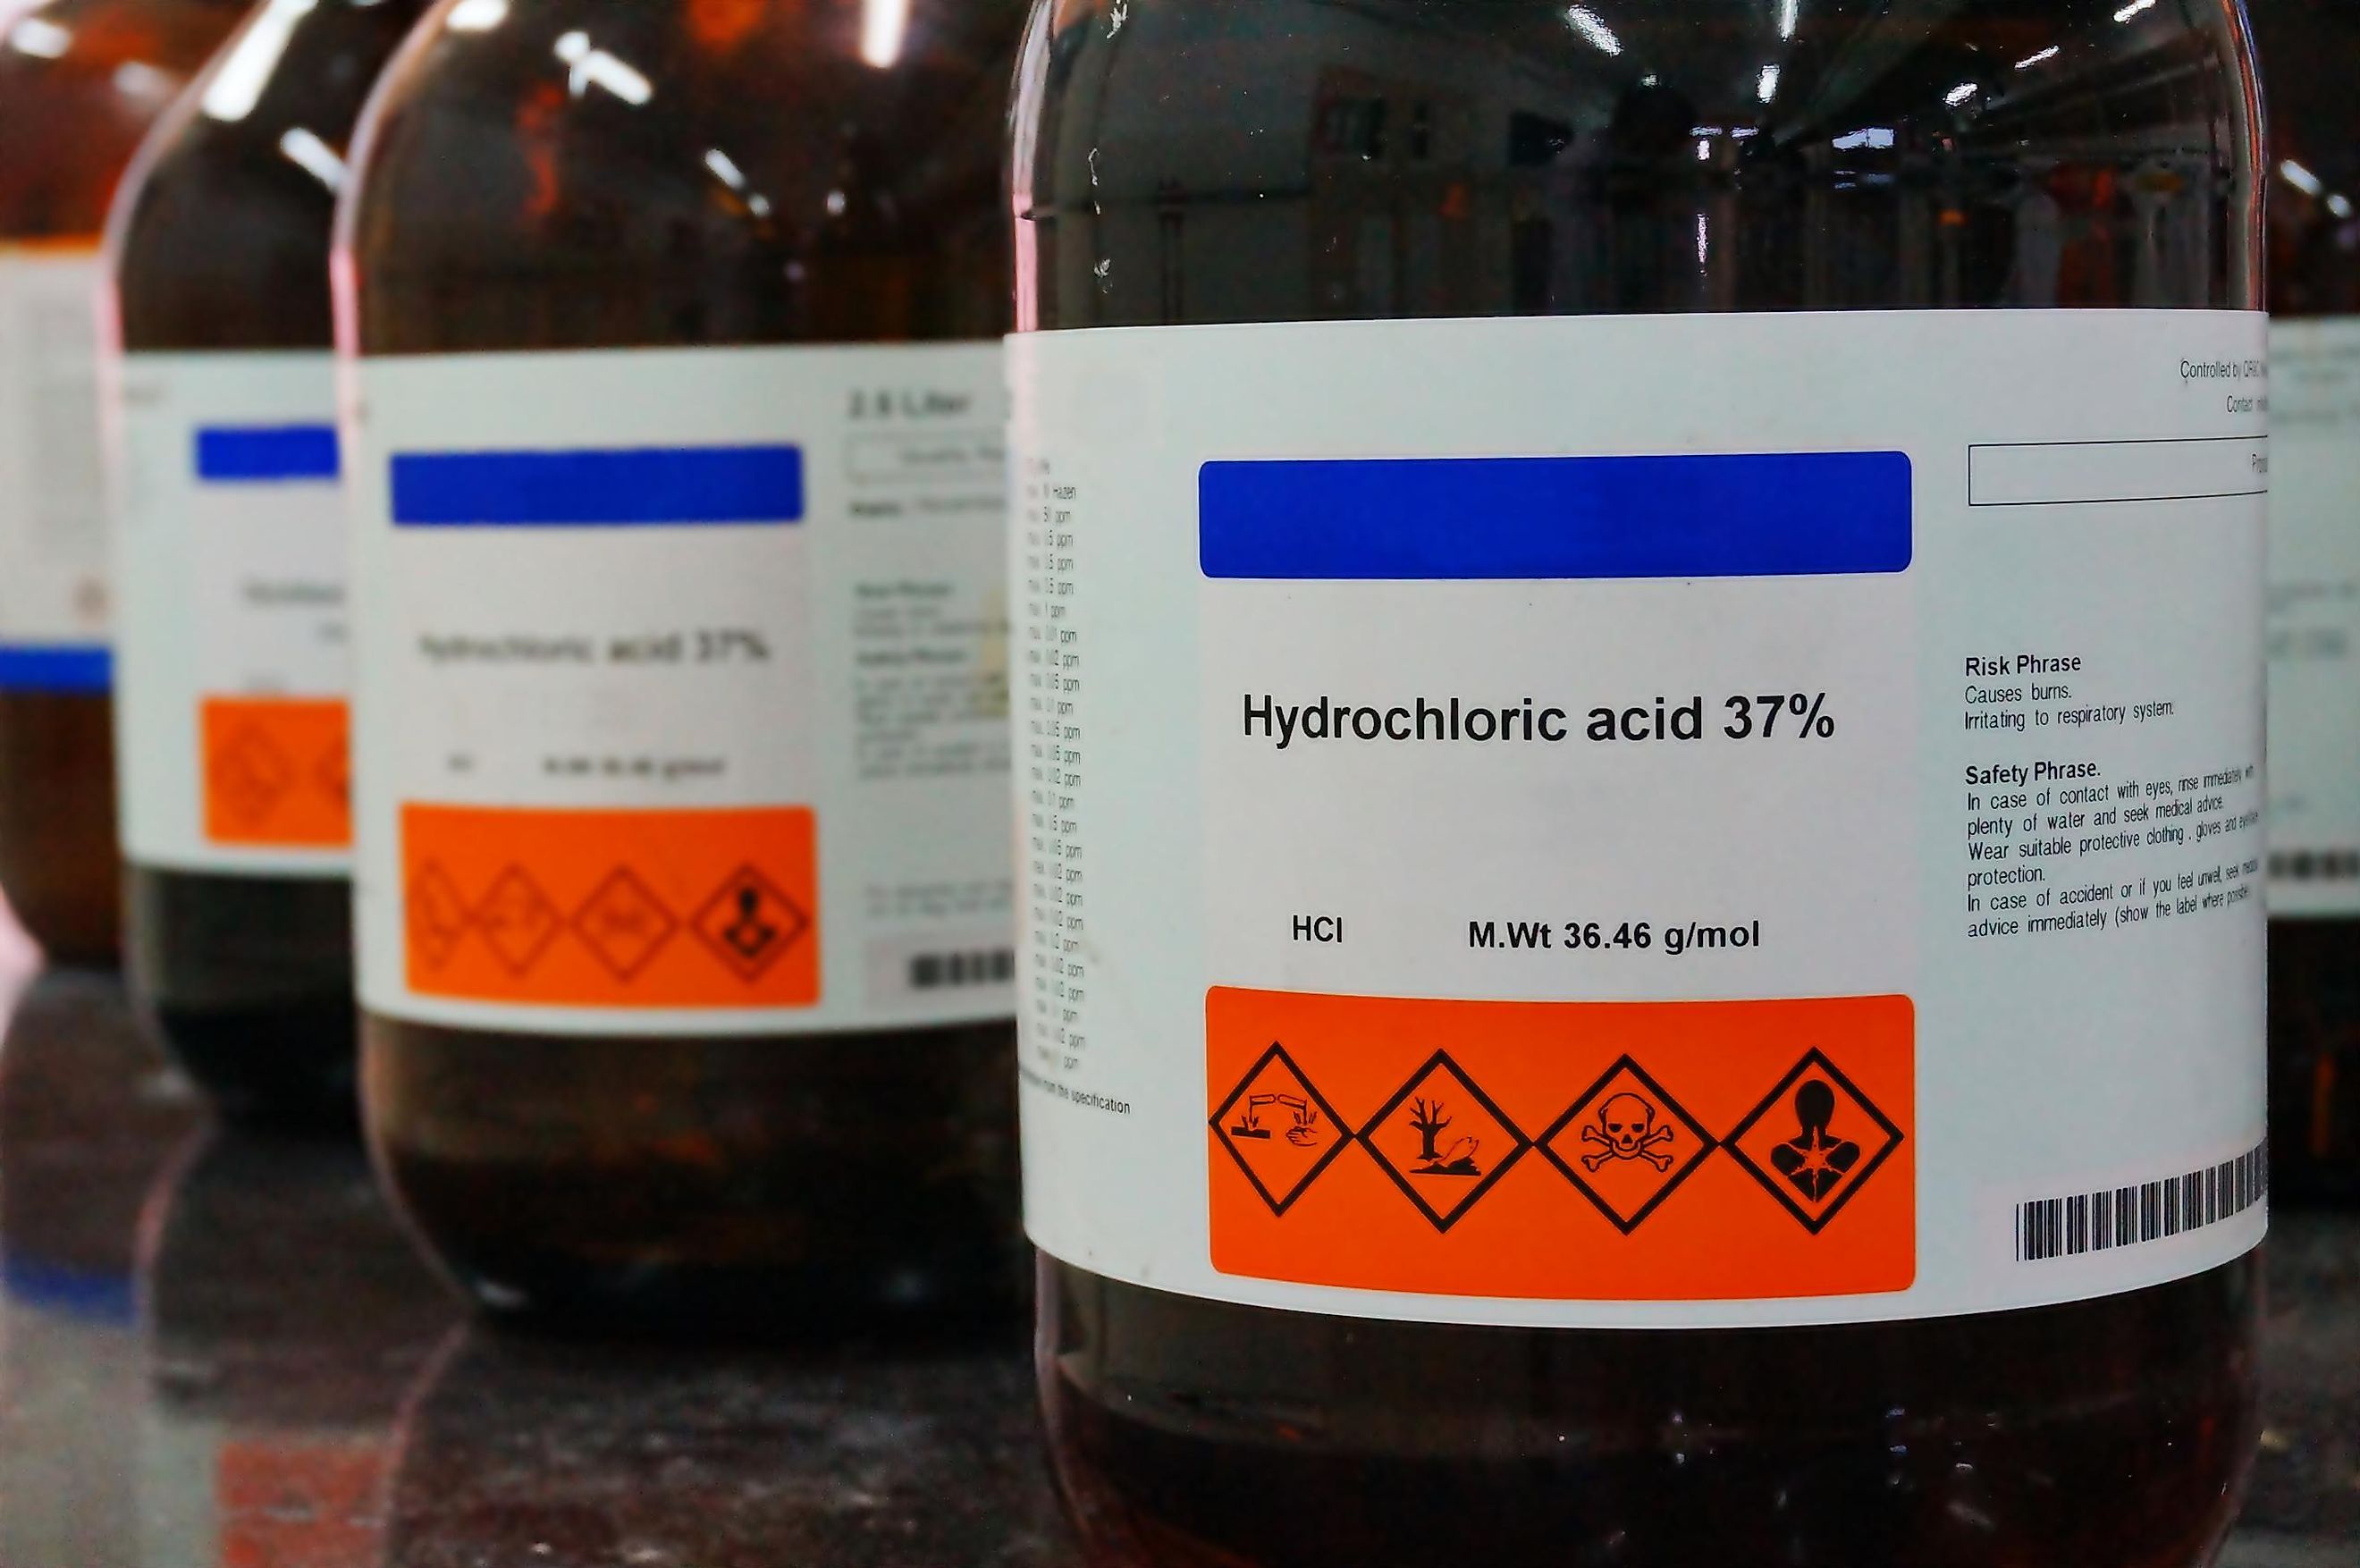 A bottle of hydrochloric acid, also called muriatic acid.